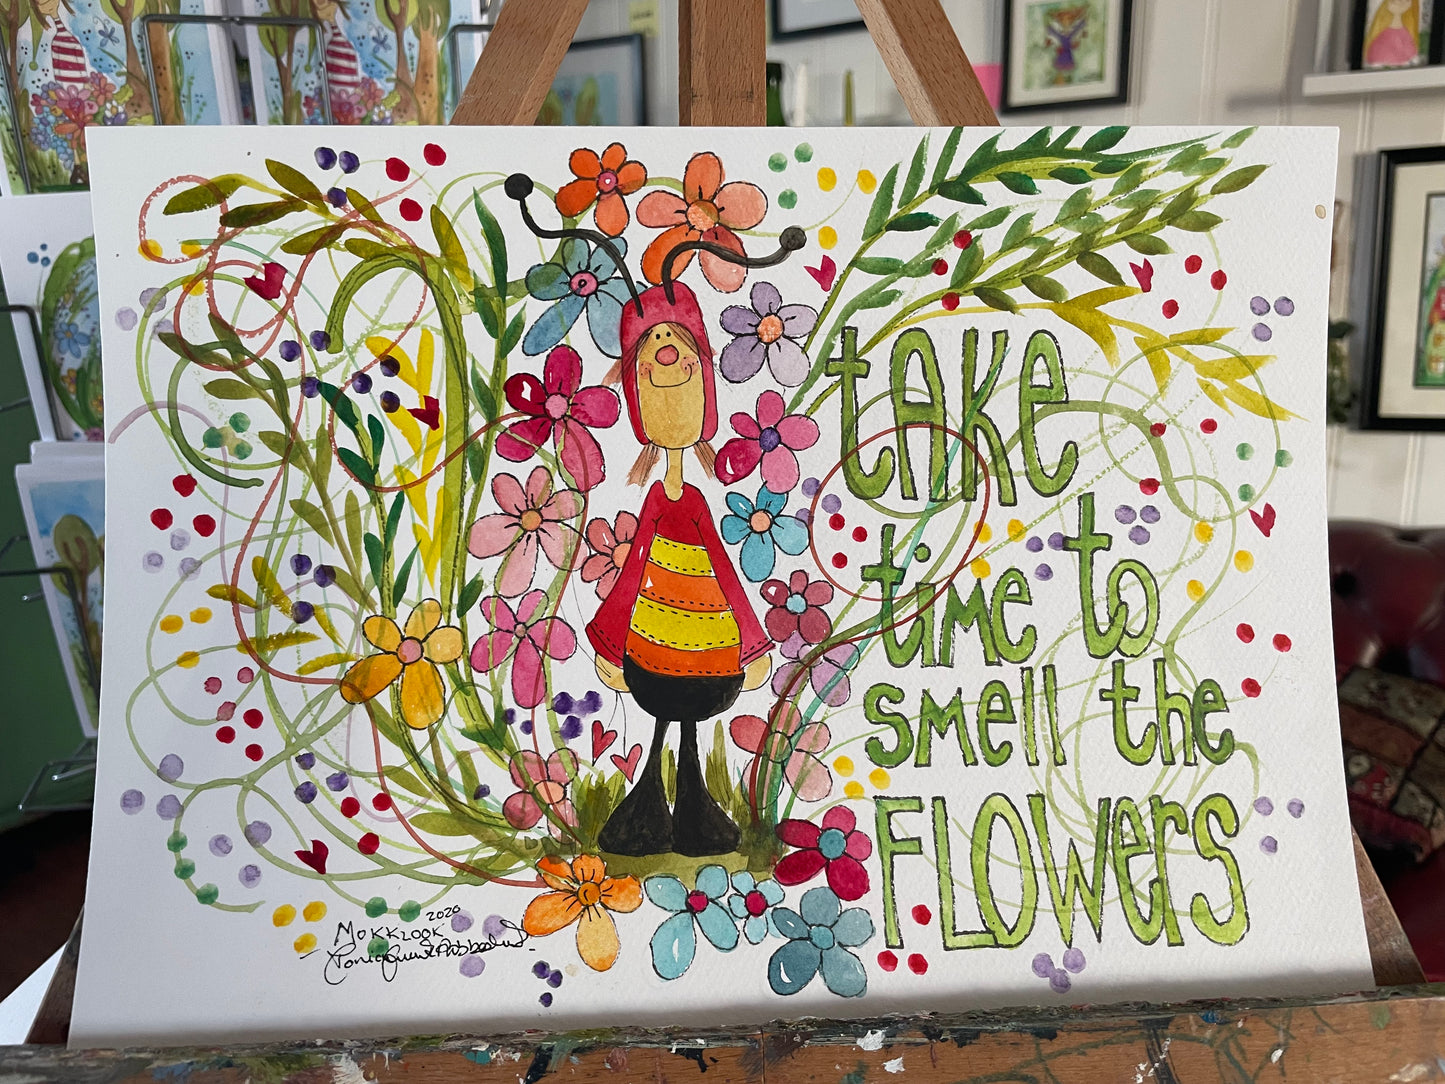 "Take time to smell the flowers"